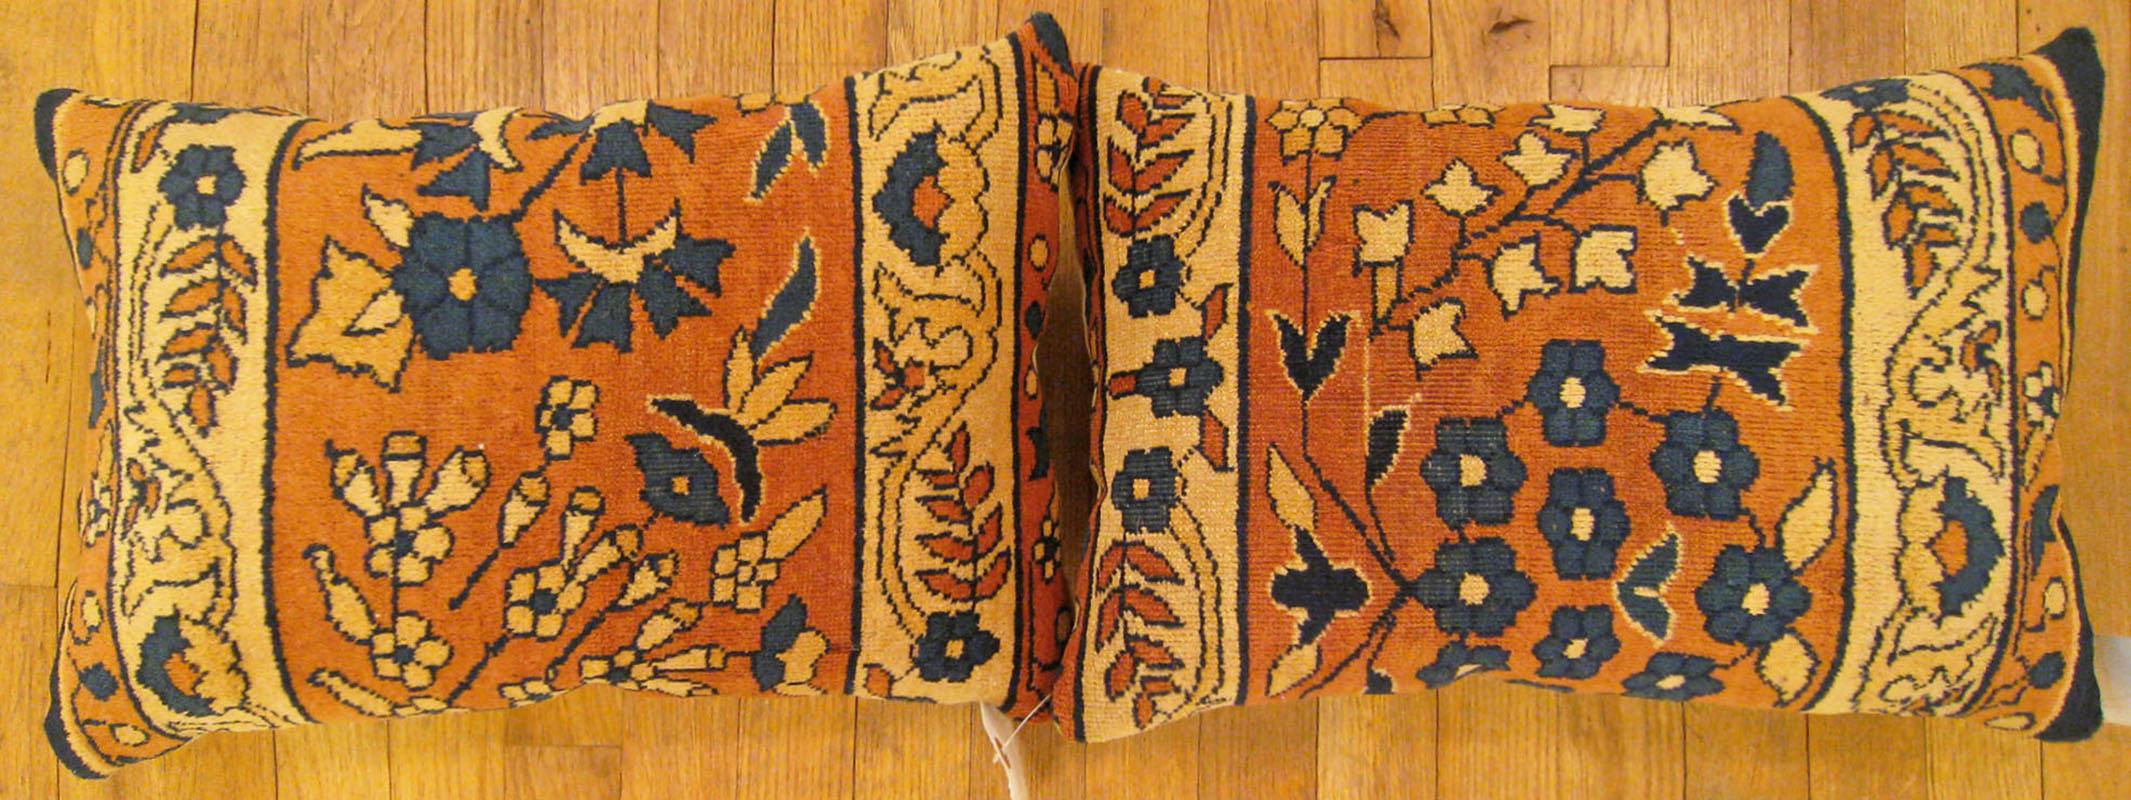 A Pair of Antique Indian Agra rug pillows ; size 1'8” x 1'2” Each.

An antique decorative pillows with floral elements allover a salmon central field, size 1'8” x 1'2” each. This lovely decorative pillow features an antique fabric of a Agra rug on